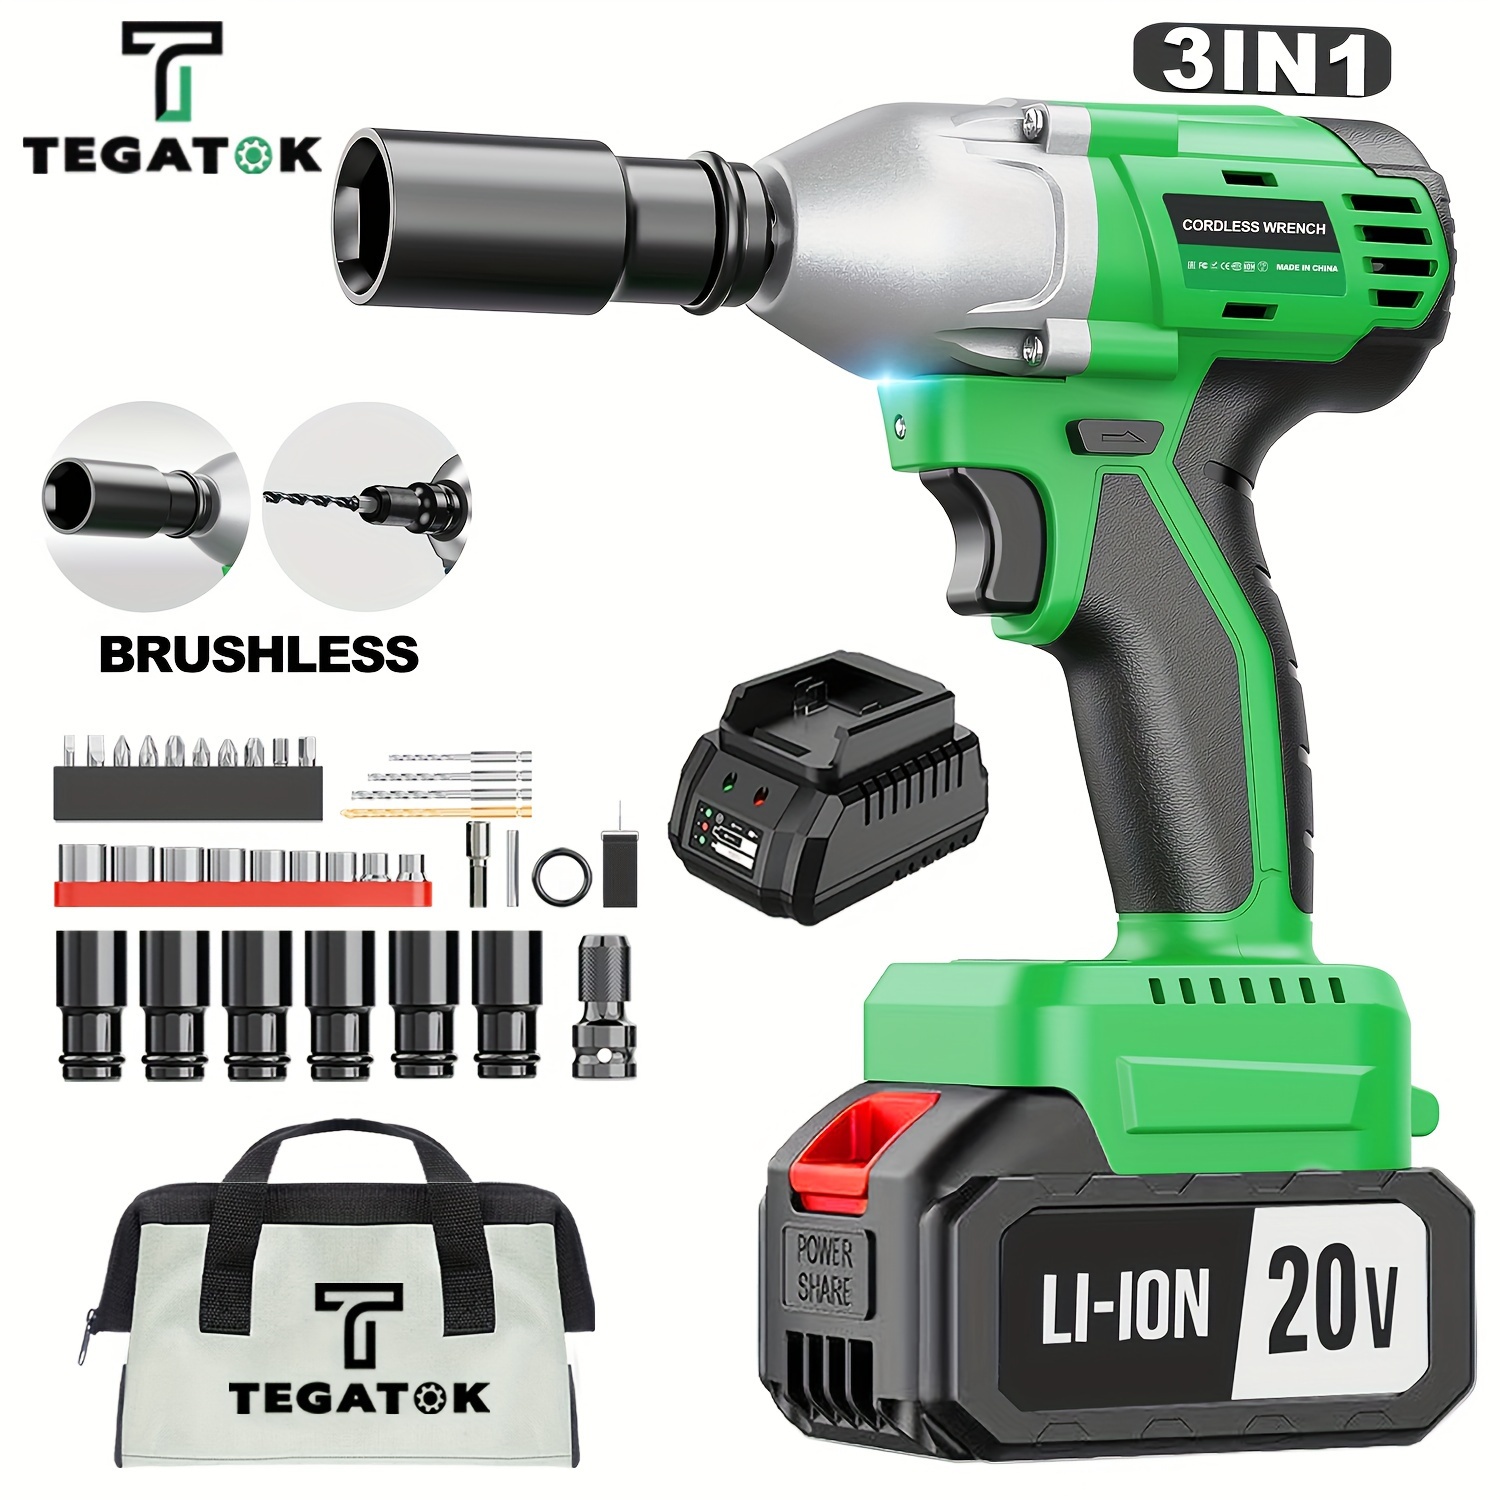 

Tegatok Cordless Impact Wrench, Power Impact Gun 1/2 (430n.m), 2400 Rpm Brushless Impact Driver With 4000 Mah Battery, Fast Charger, 6 Sockets & Tool Bag, 3-in-1 Electric Impact Wrench For Car Home